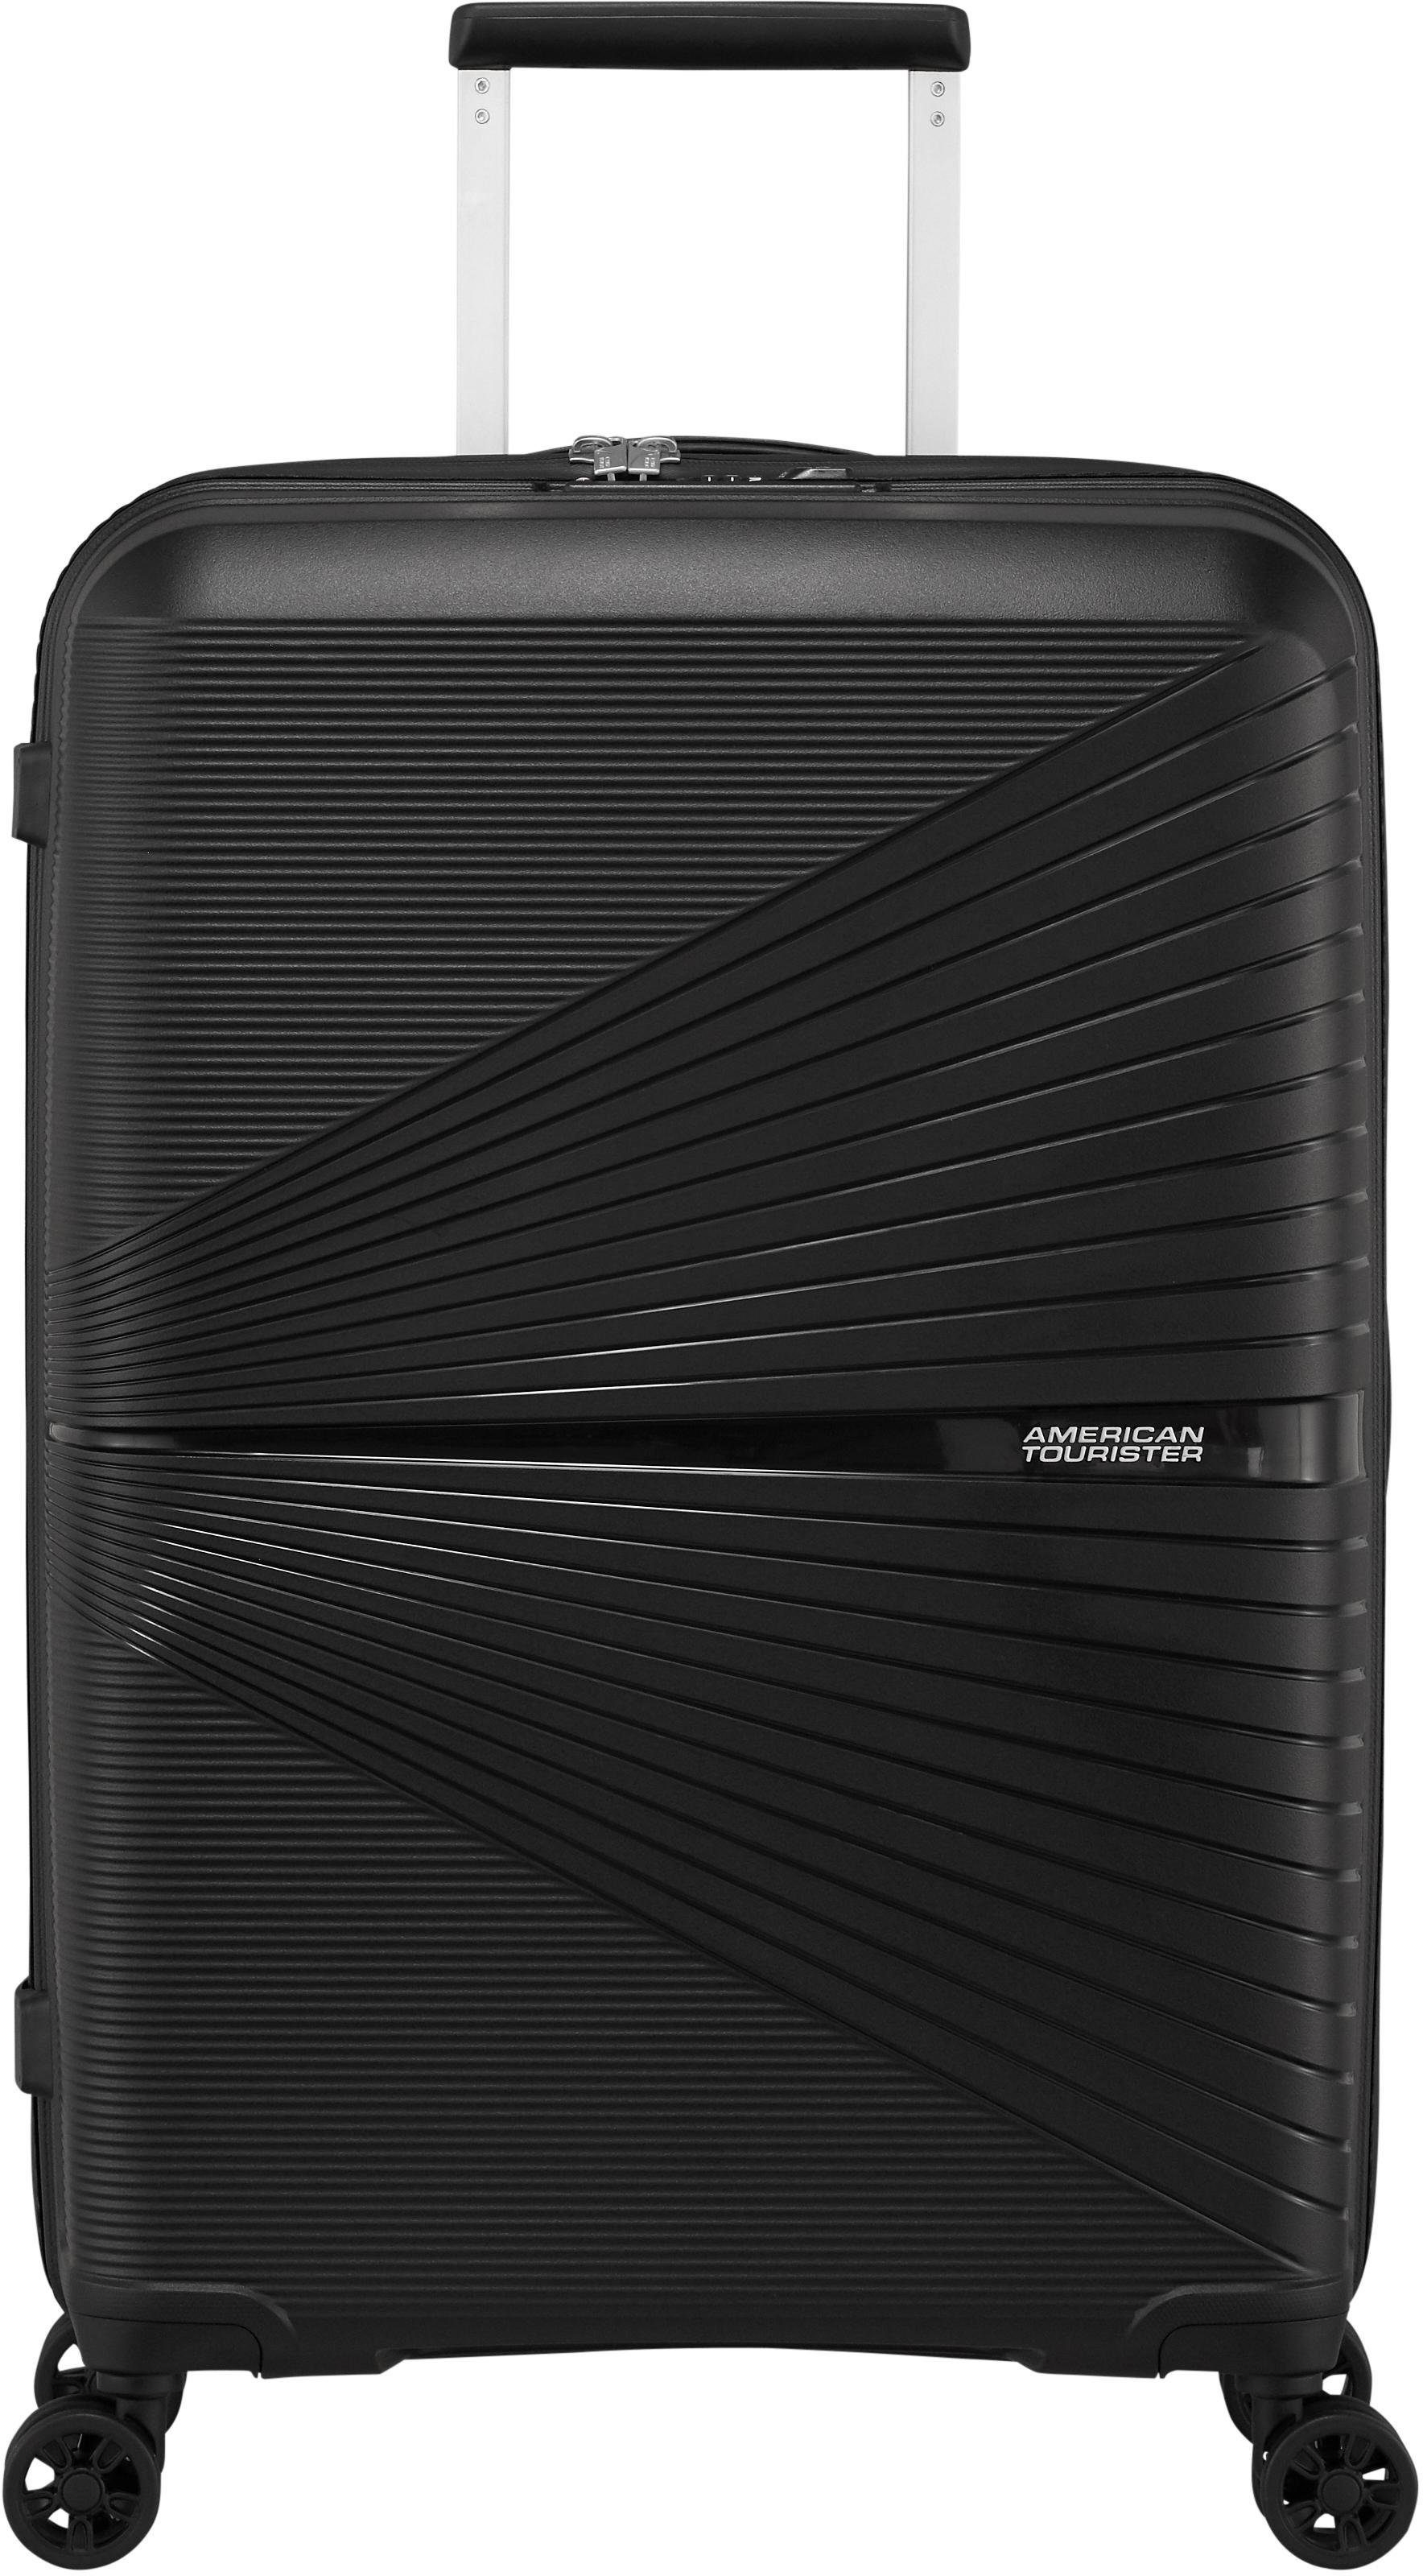 Onyx Rollen American Spinner Black 67, Tourister® 4 Koffer AIRCONIC